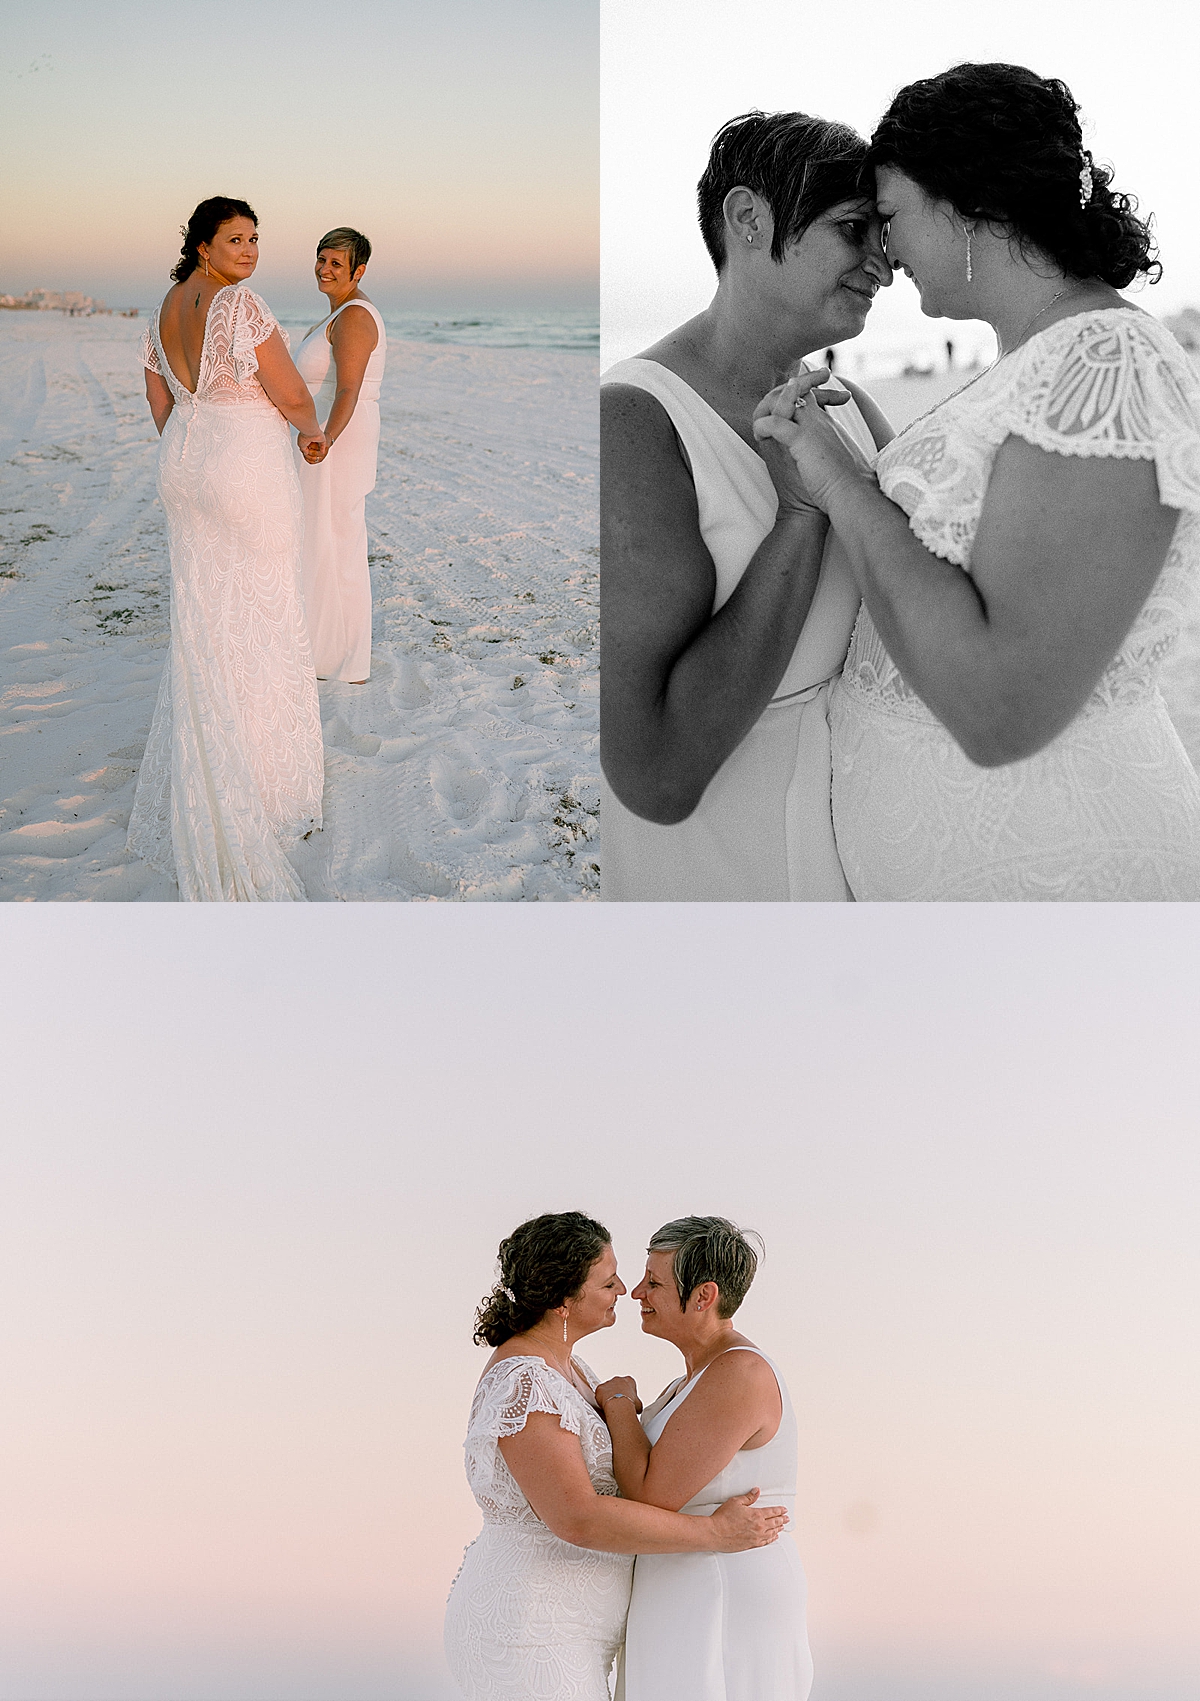 Sunset portrait of brides on the beach after ceremony by Emily Burns photo